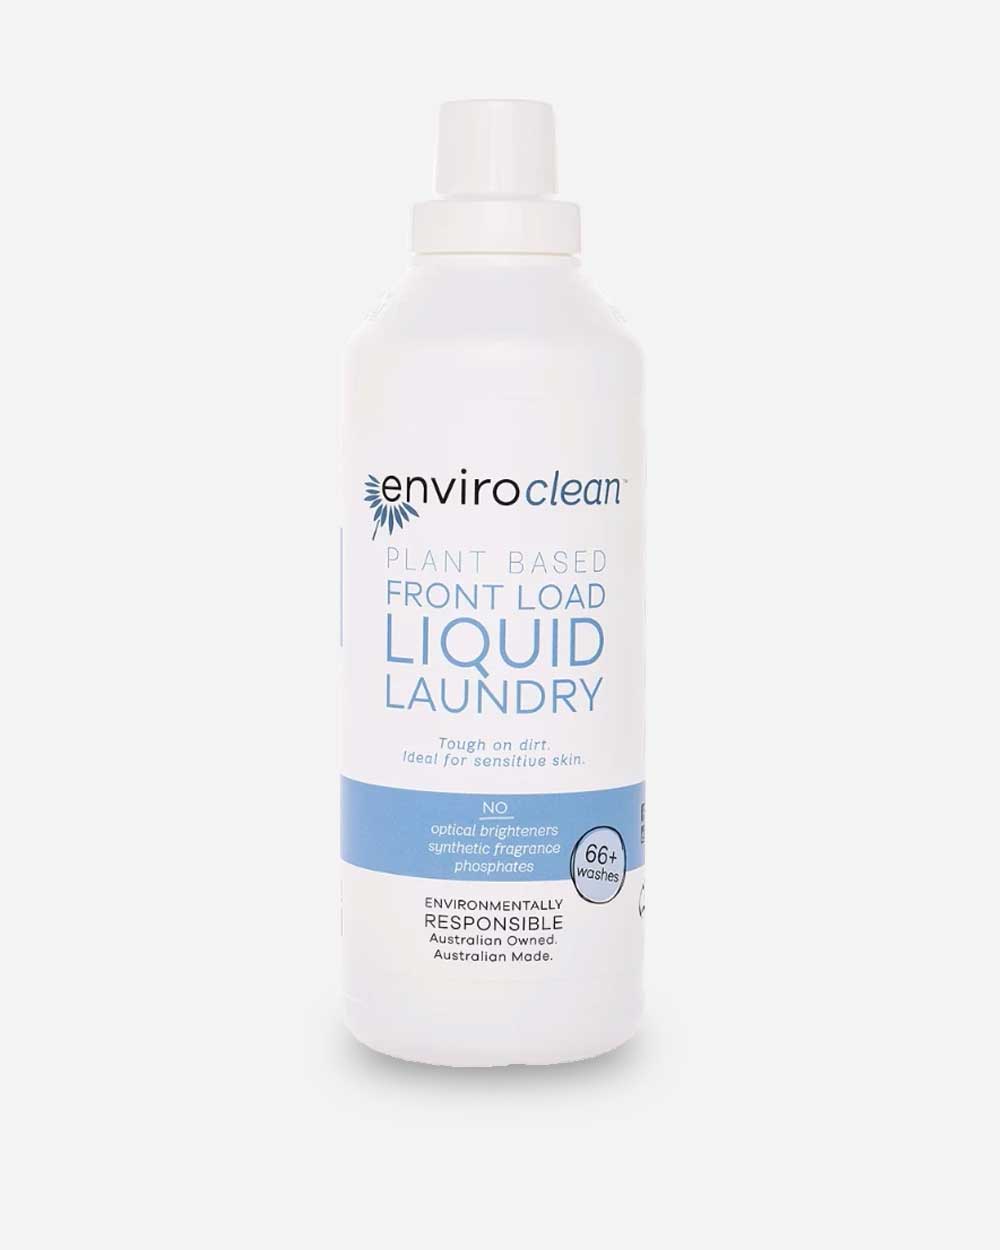 Front Load Laundry Liquid from Enviroclean- Sensitive